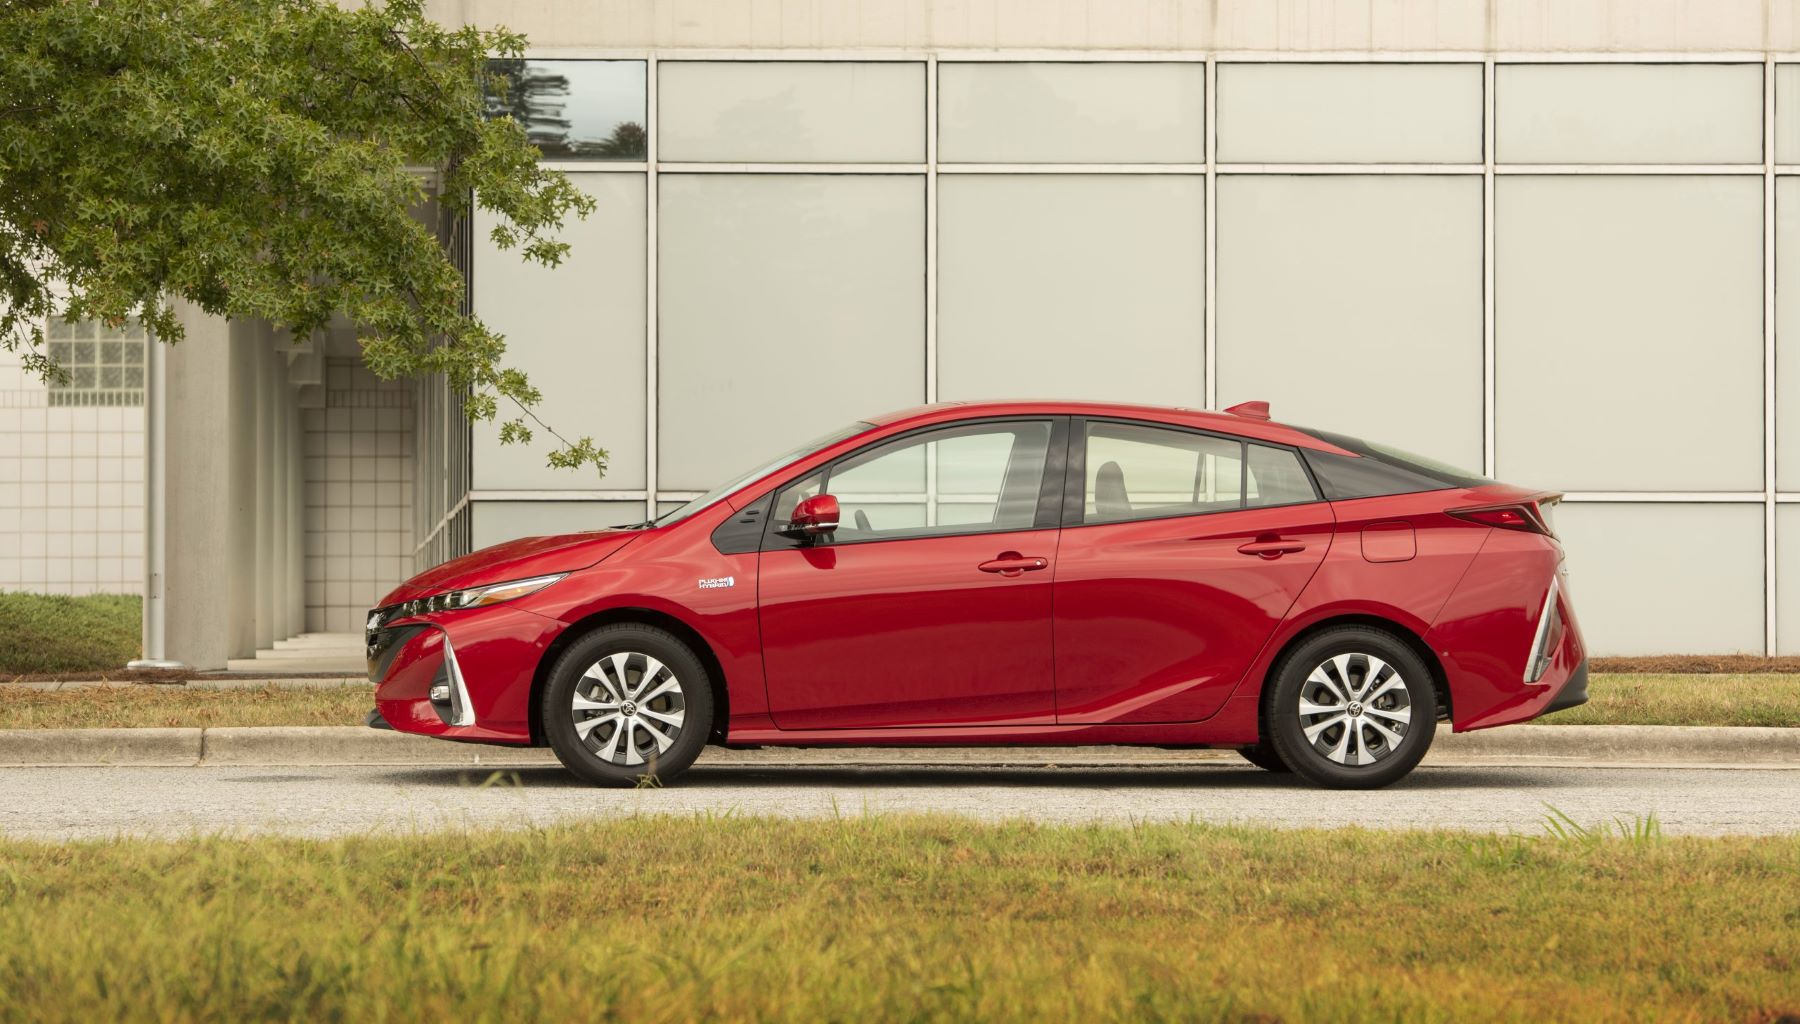 2022 Toyota Prius Prime plug-in hybrid hatchback side profile with a red color option